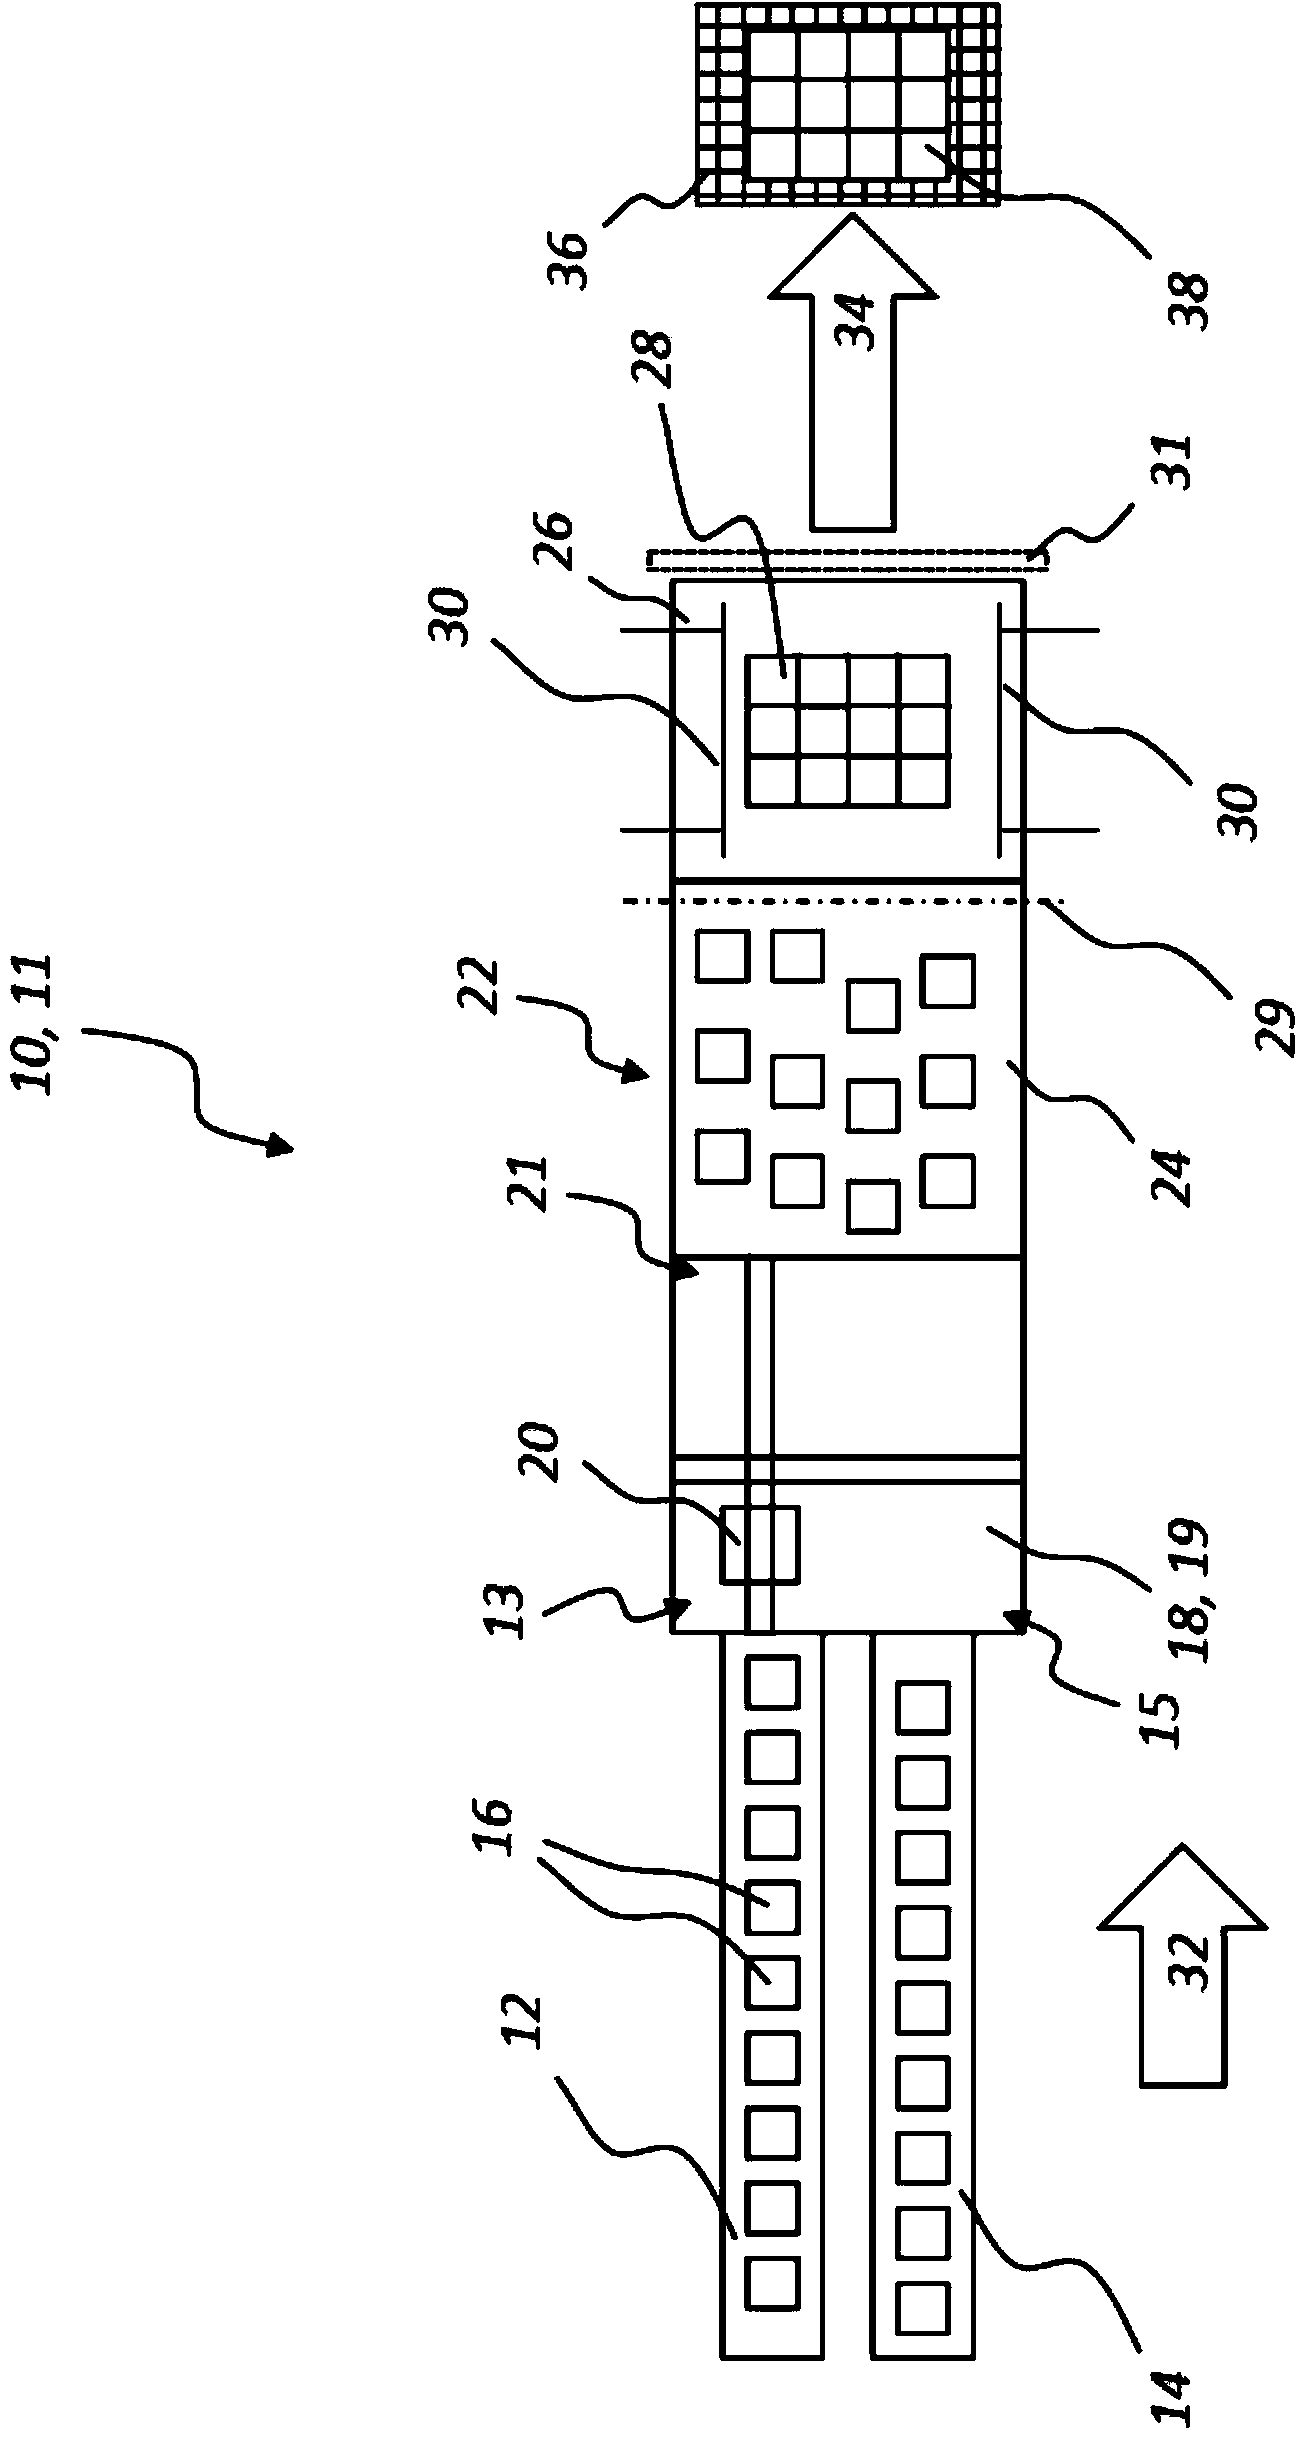 Method and apparatus for forming layers of articles or multipacks